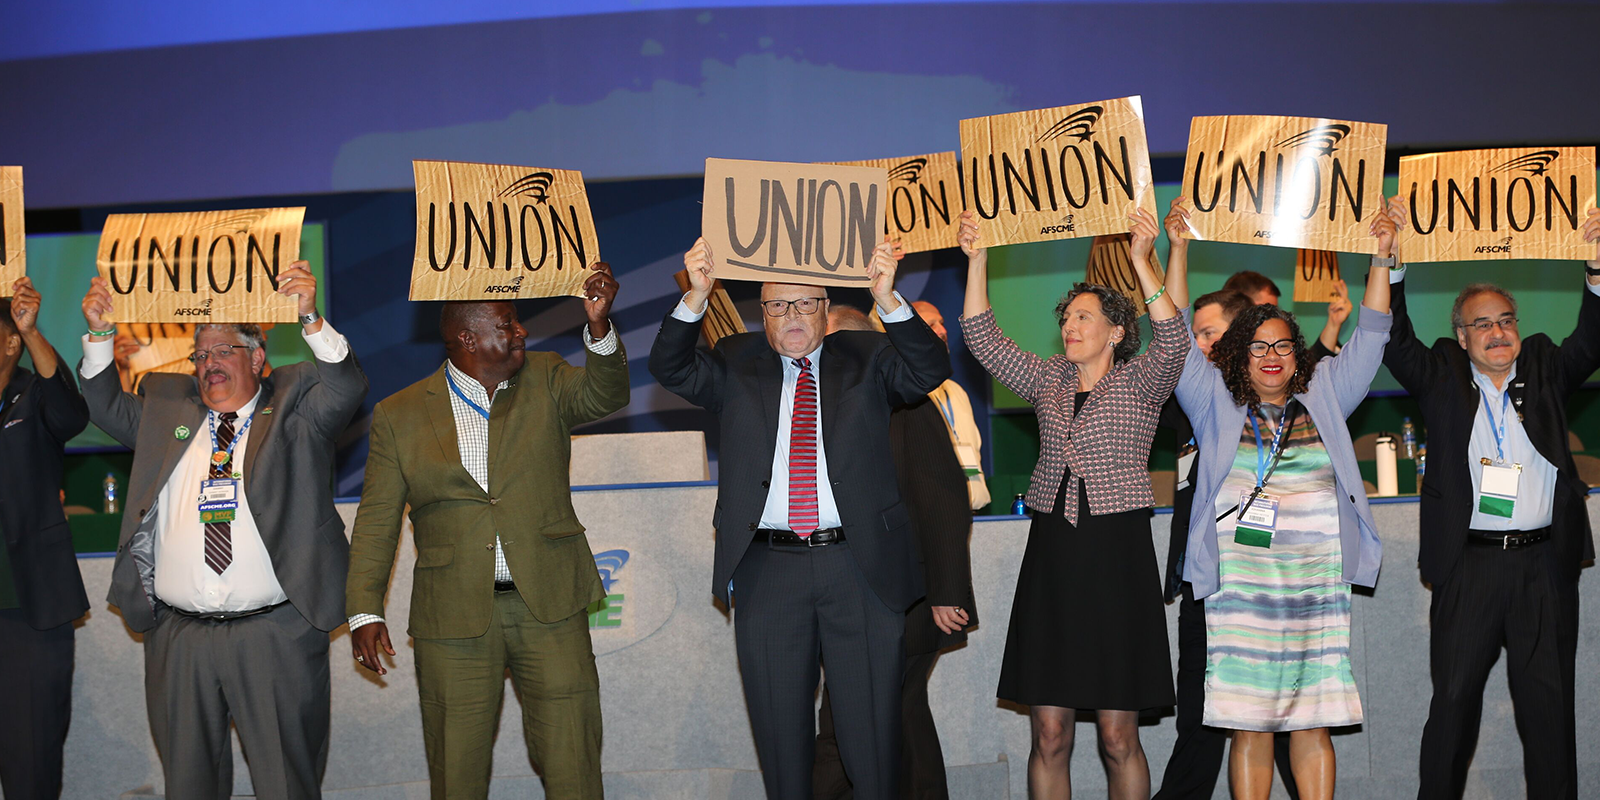 Lee Saunders, Elissa McBride and other union members hold up Union signs